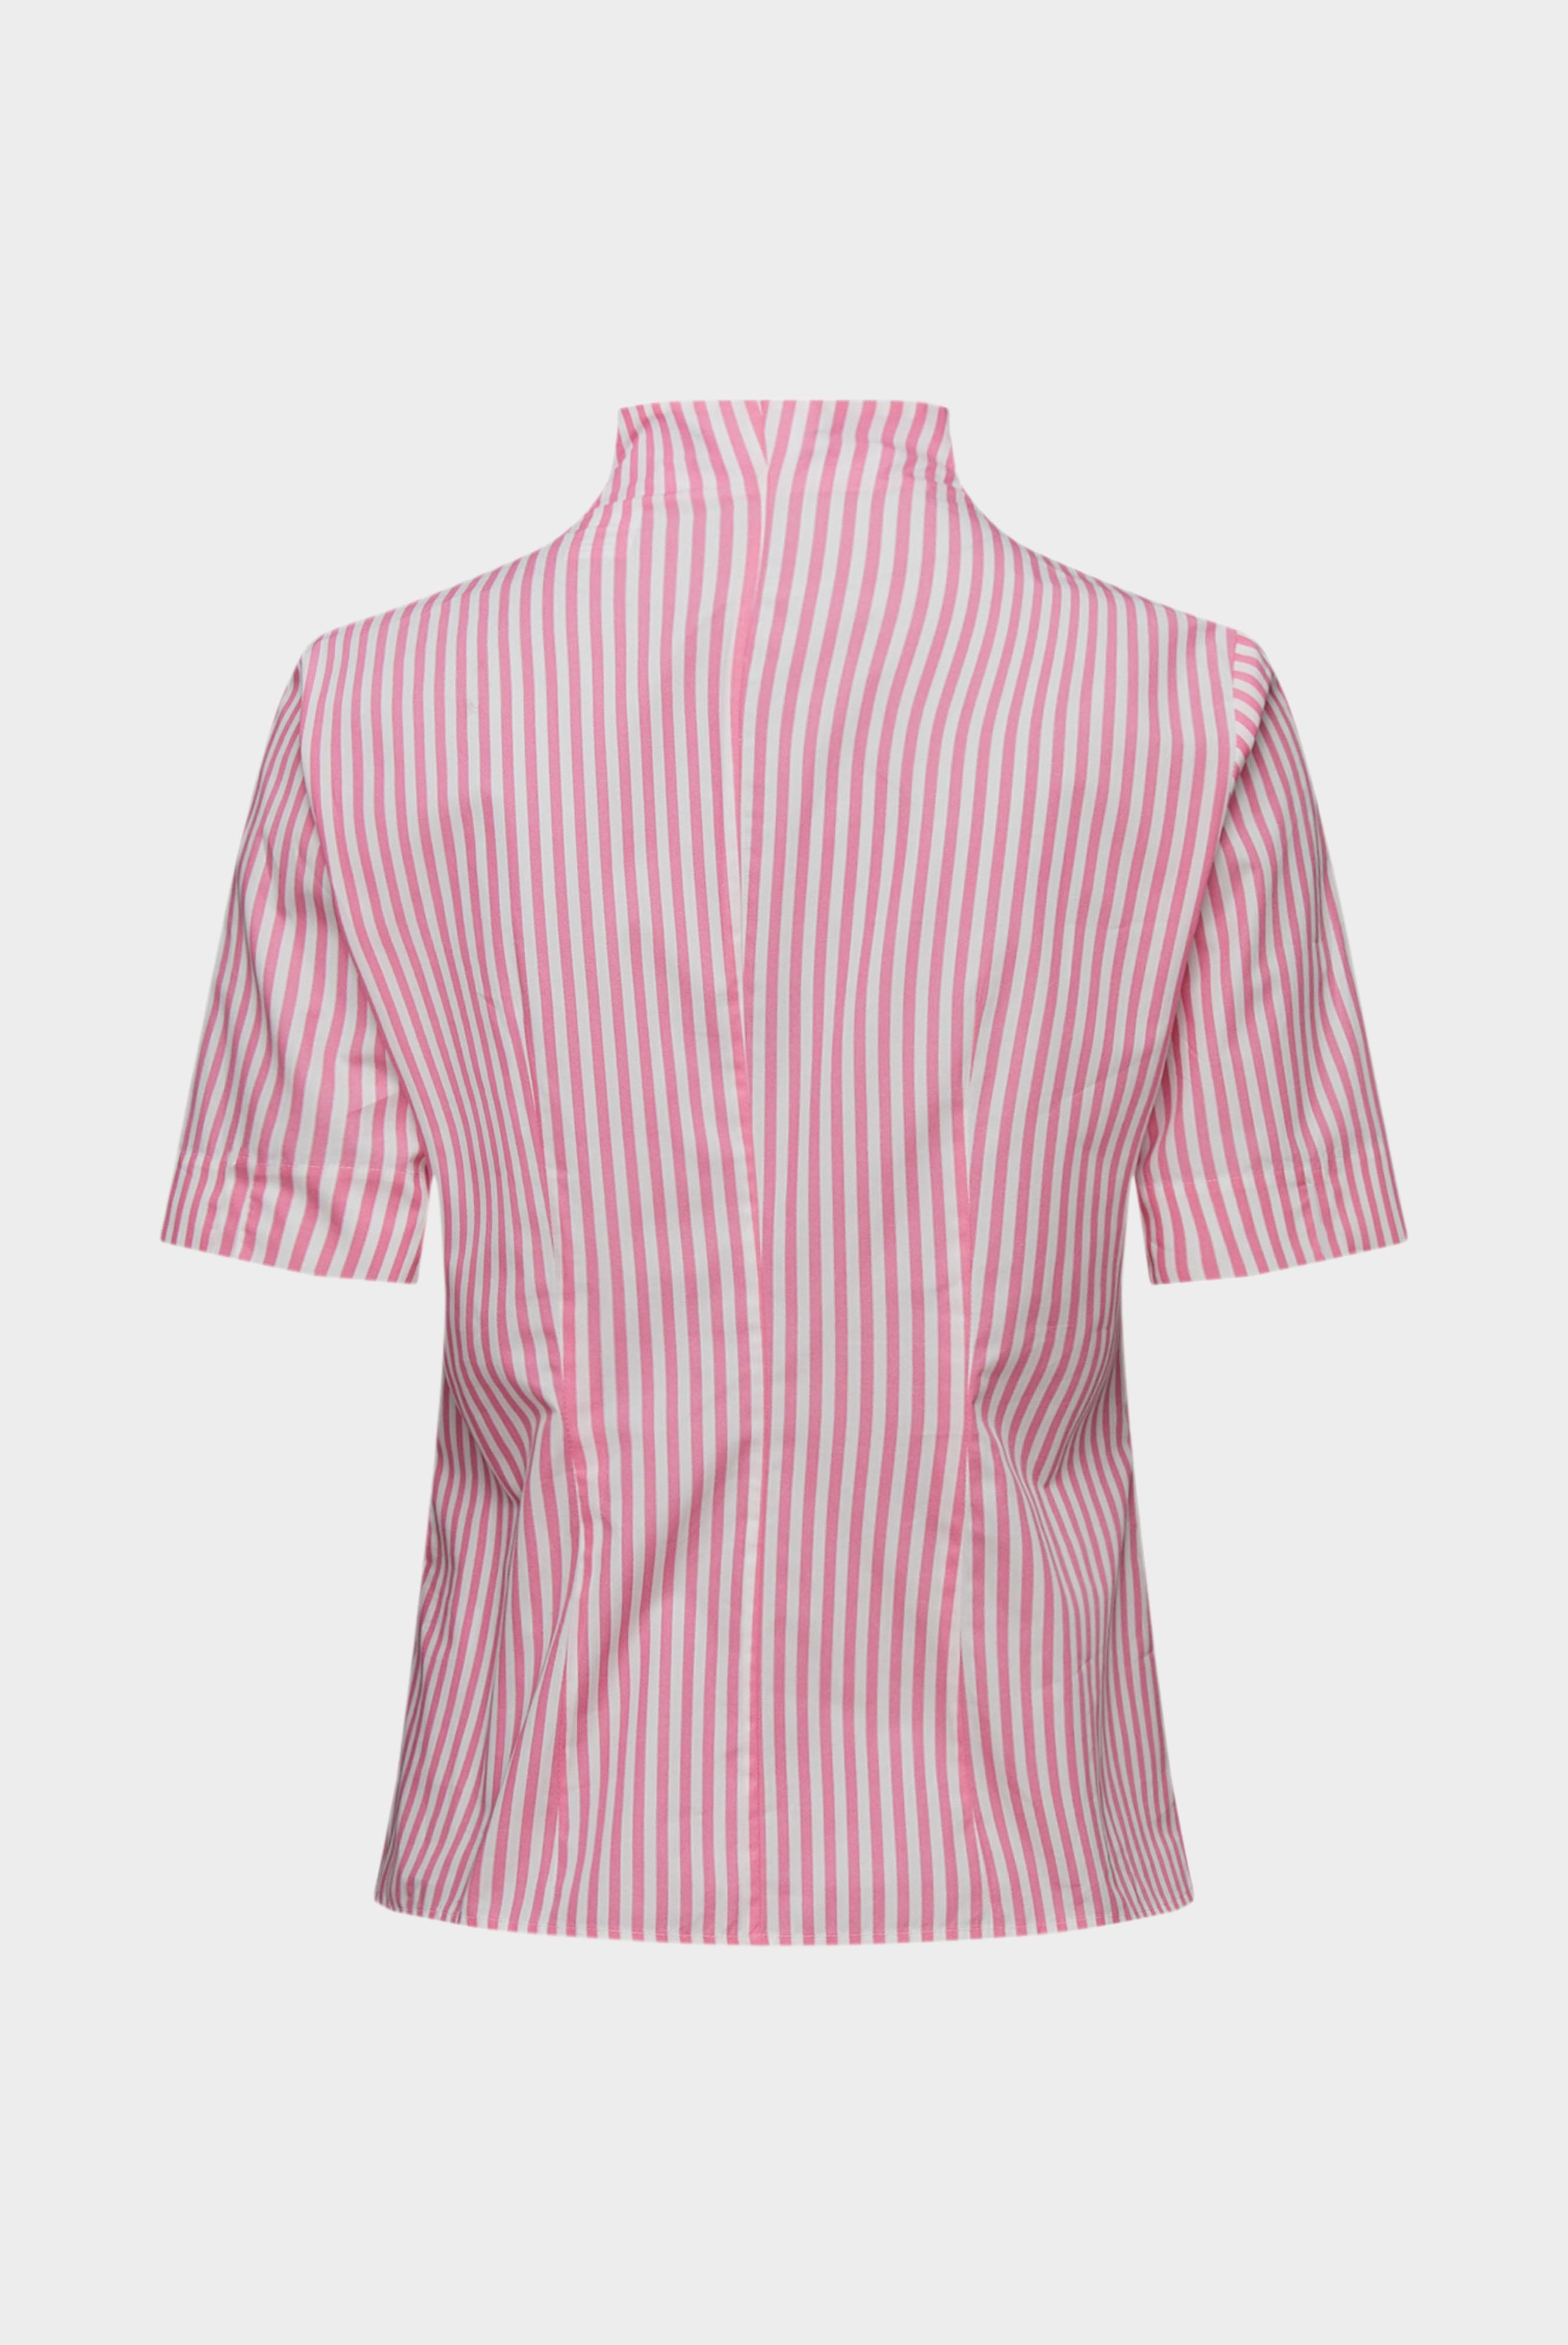 Business Blouses+Striped cup-collar blouse in cotton poplin+05.5814.FG.170275.530.32